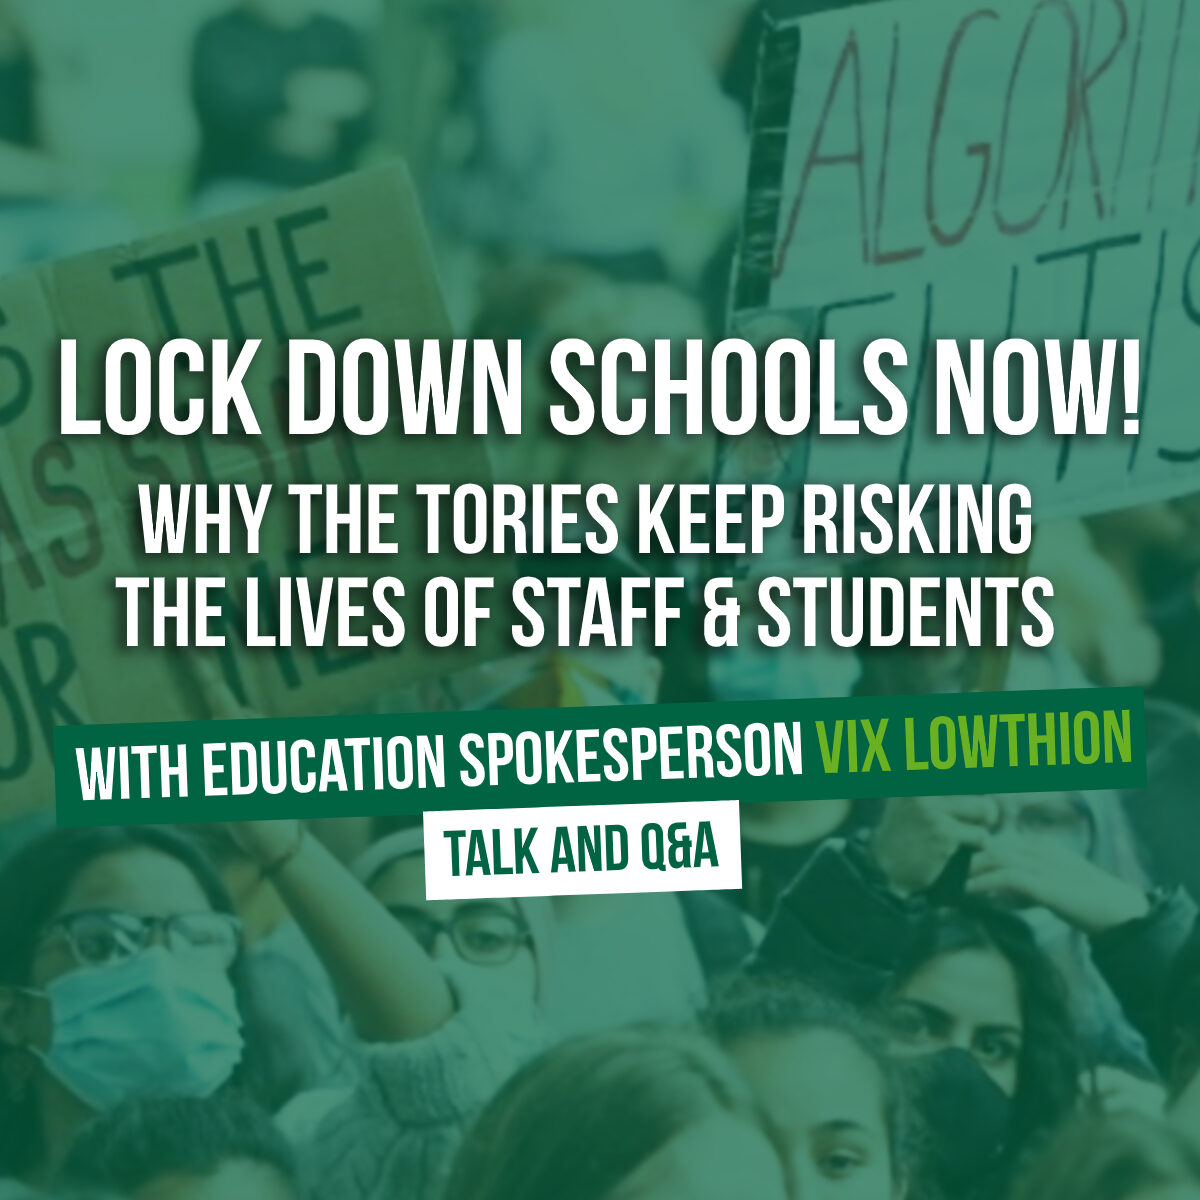 Lock down schools now! Why the Tories keep risking the lives of staff and students. with Education Spokesperson Vix Lowthion